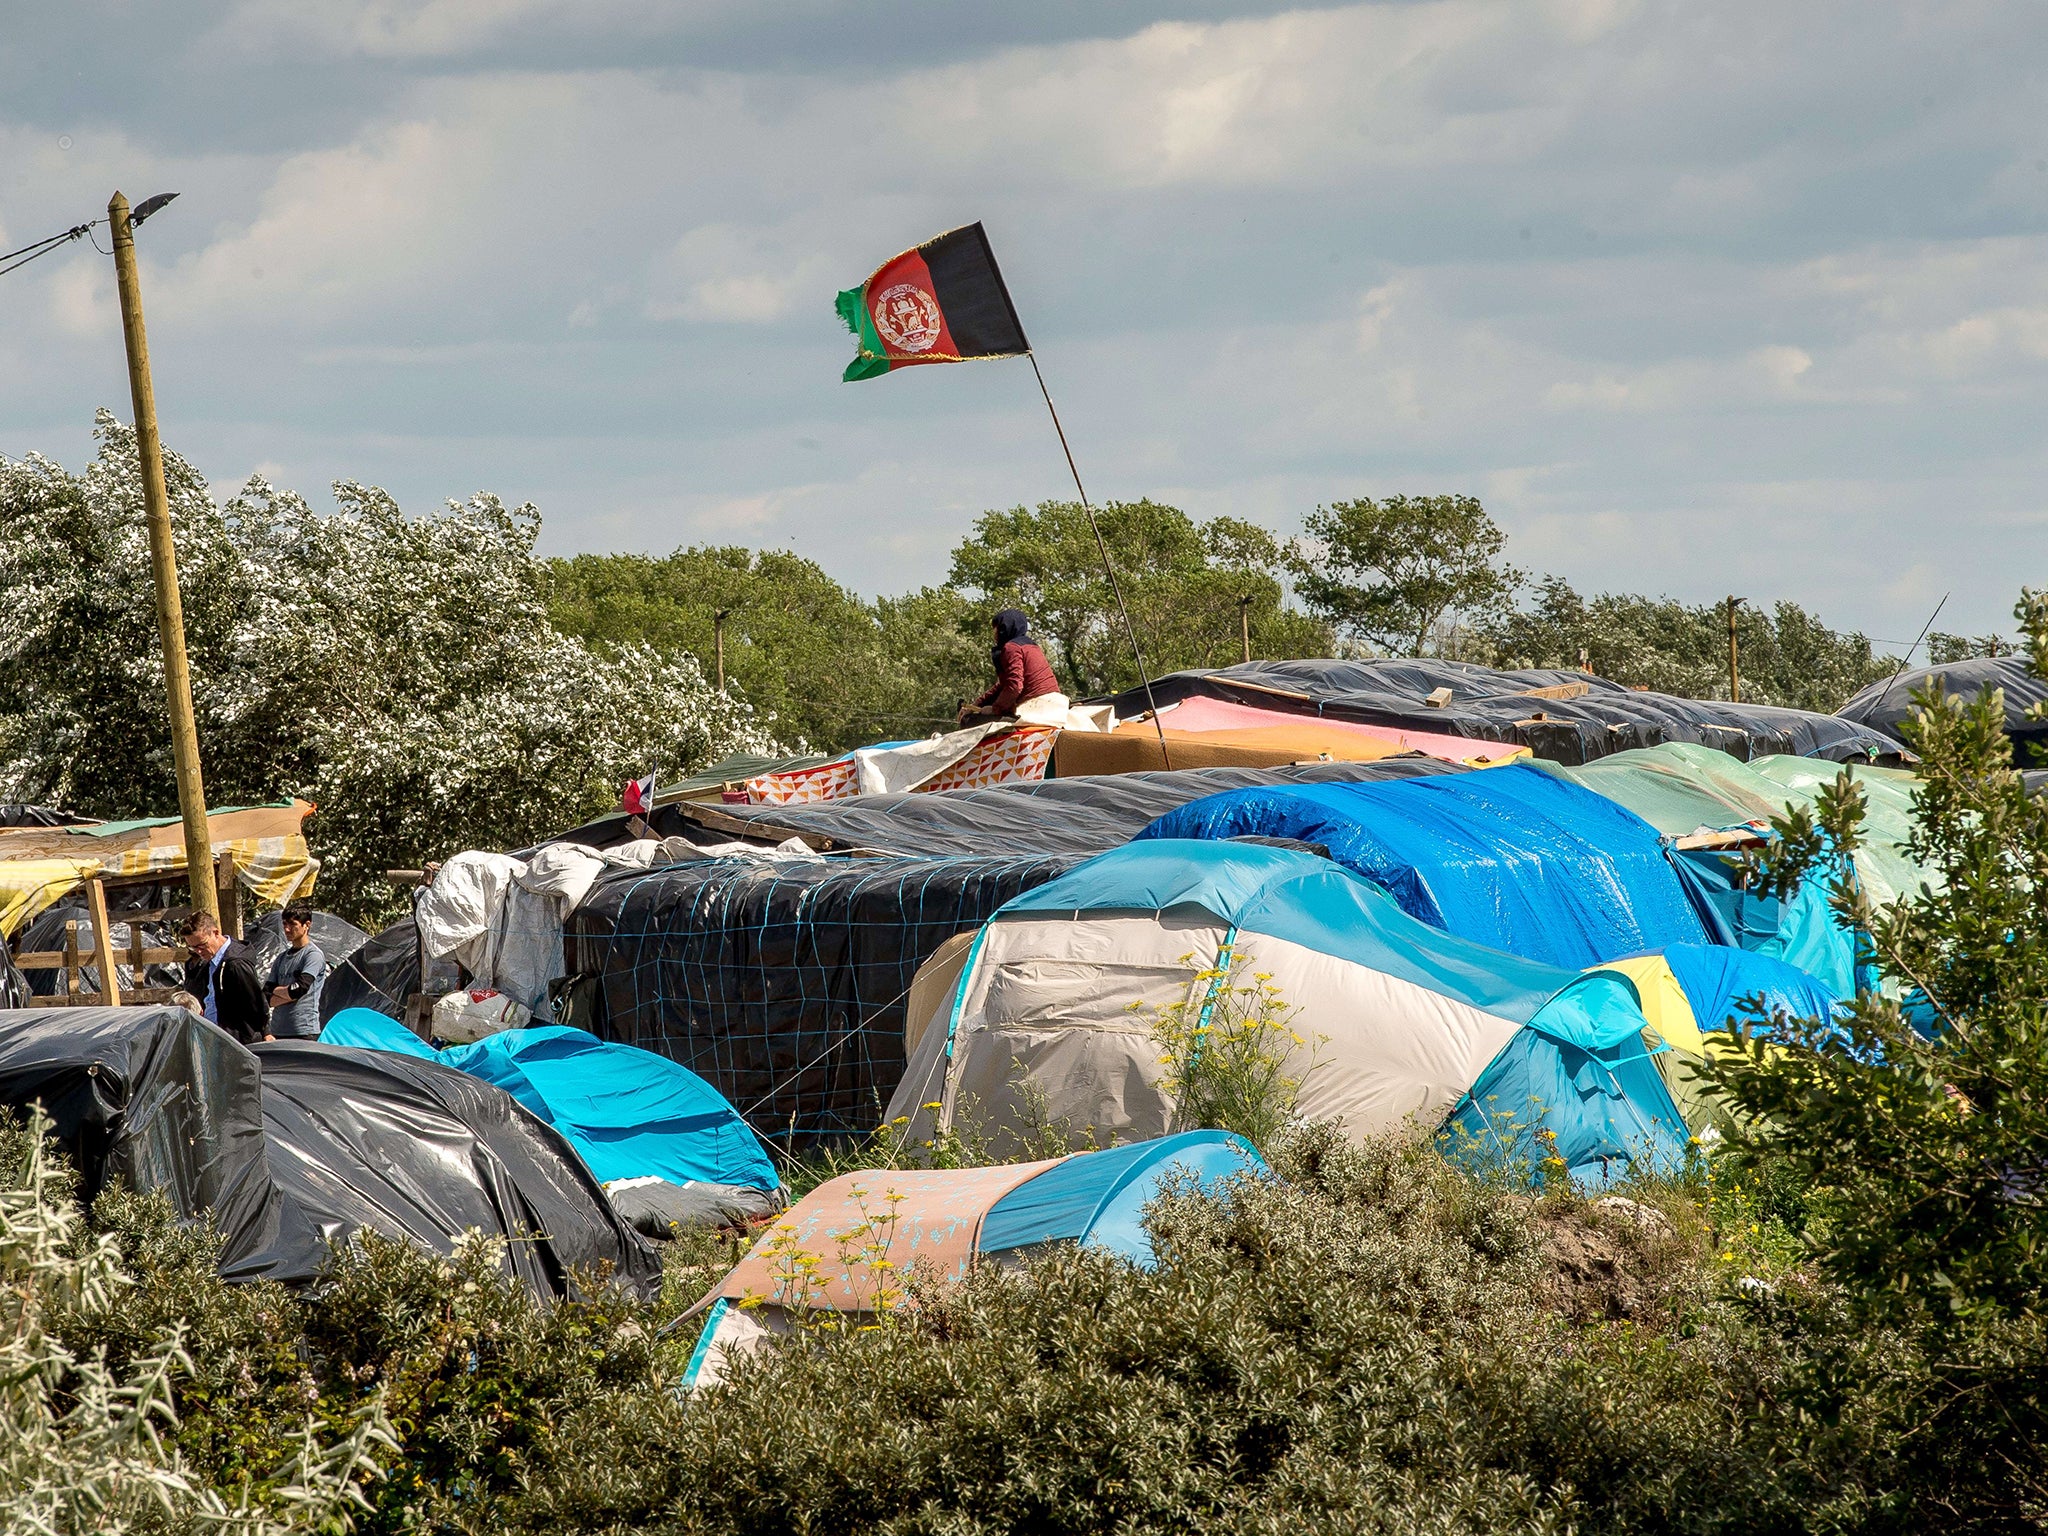 An Afghan flag flies above makeshift shelters at a site dubbed the "new jungle", where migrants trying to cross the Channel to reach Britain have camped out around the northern French port of Calais